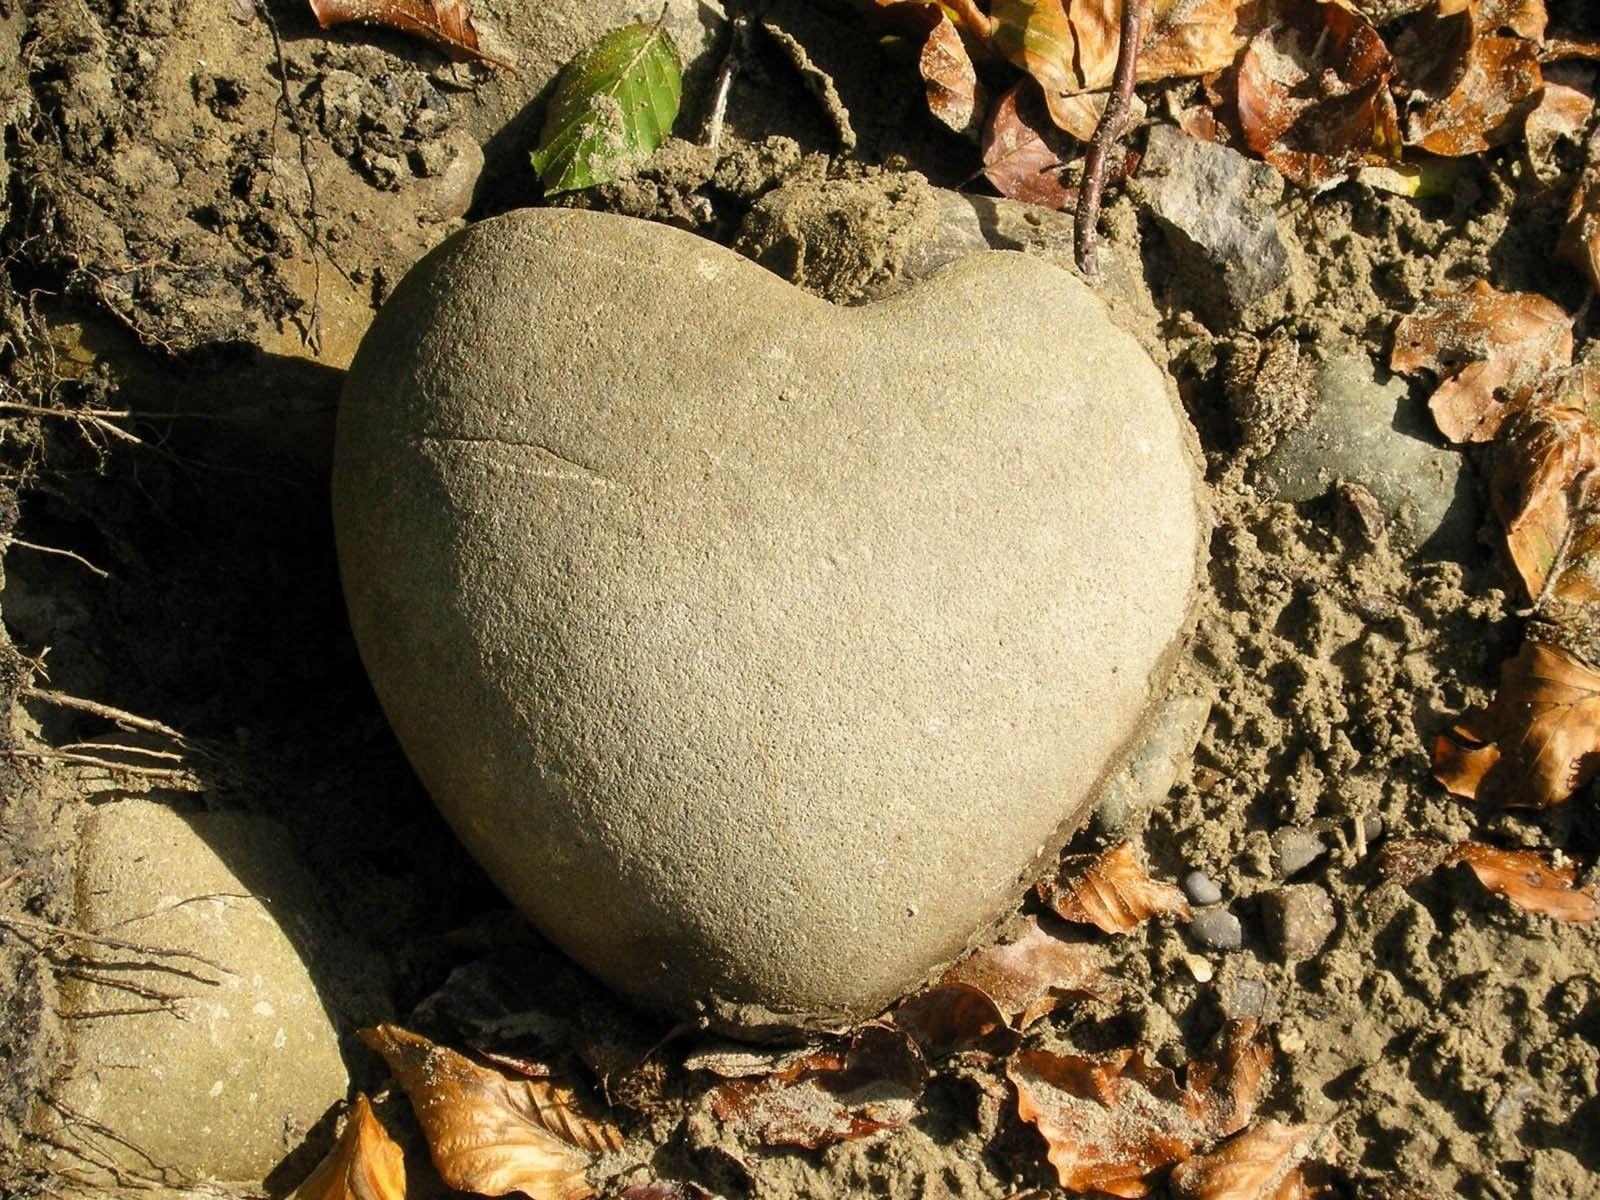 Misc: Heart Stone Natural Rock Stones Mud Nature Roots Leaves